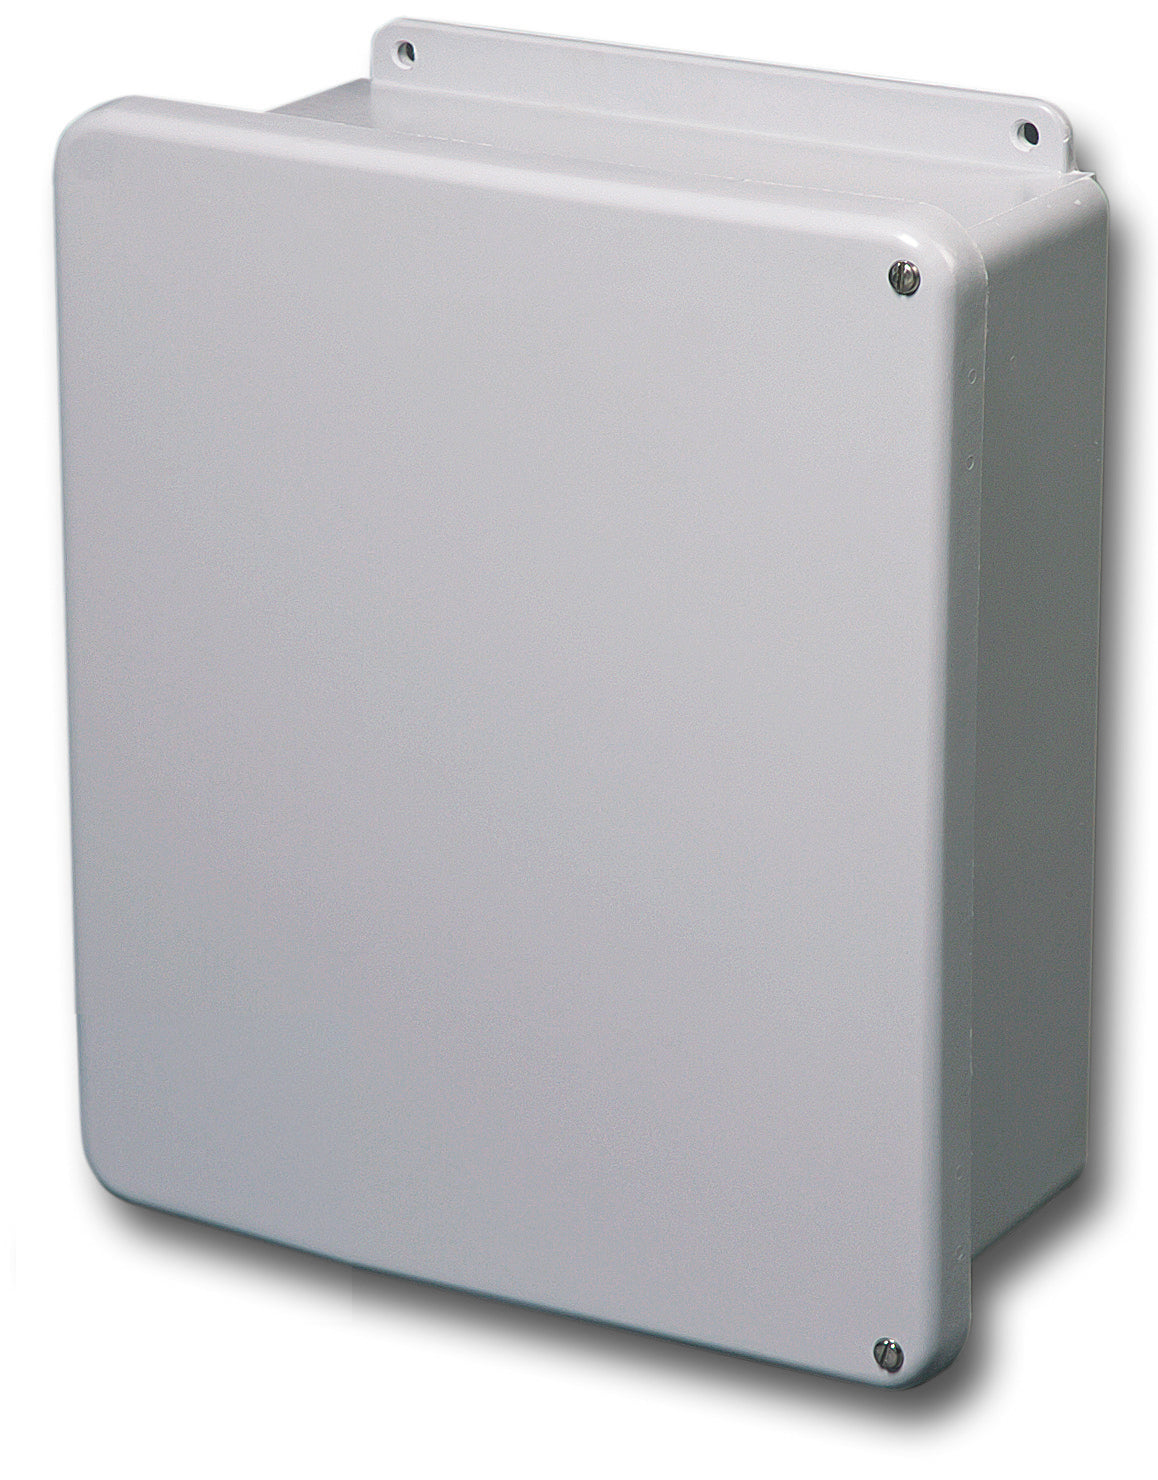 N4X   FG   CHSC Series     Fiberglass Enclosures Hinged with Screw Cover-1